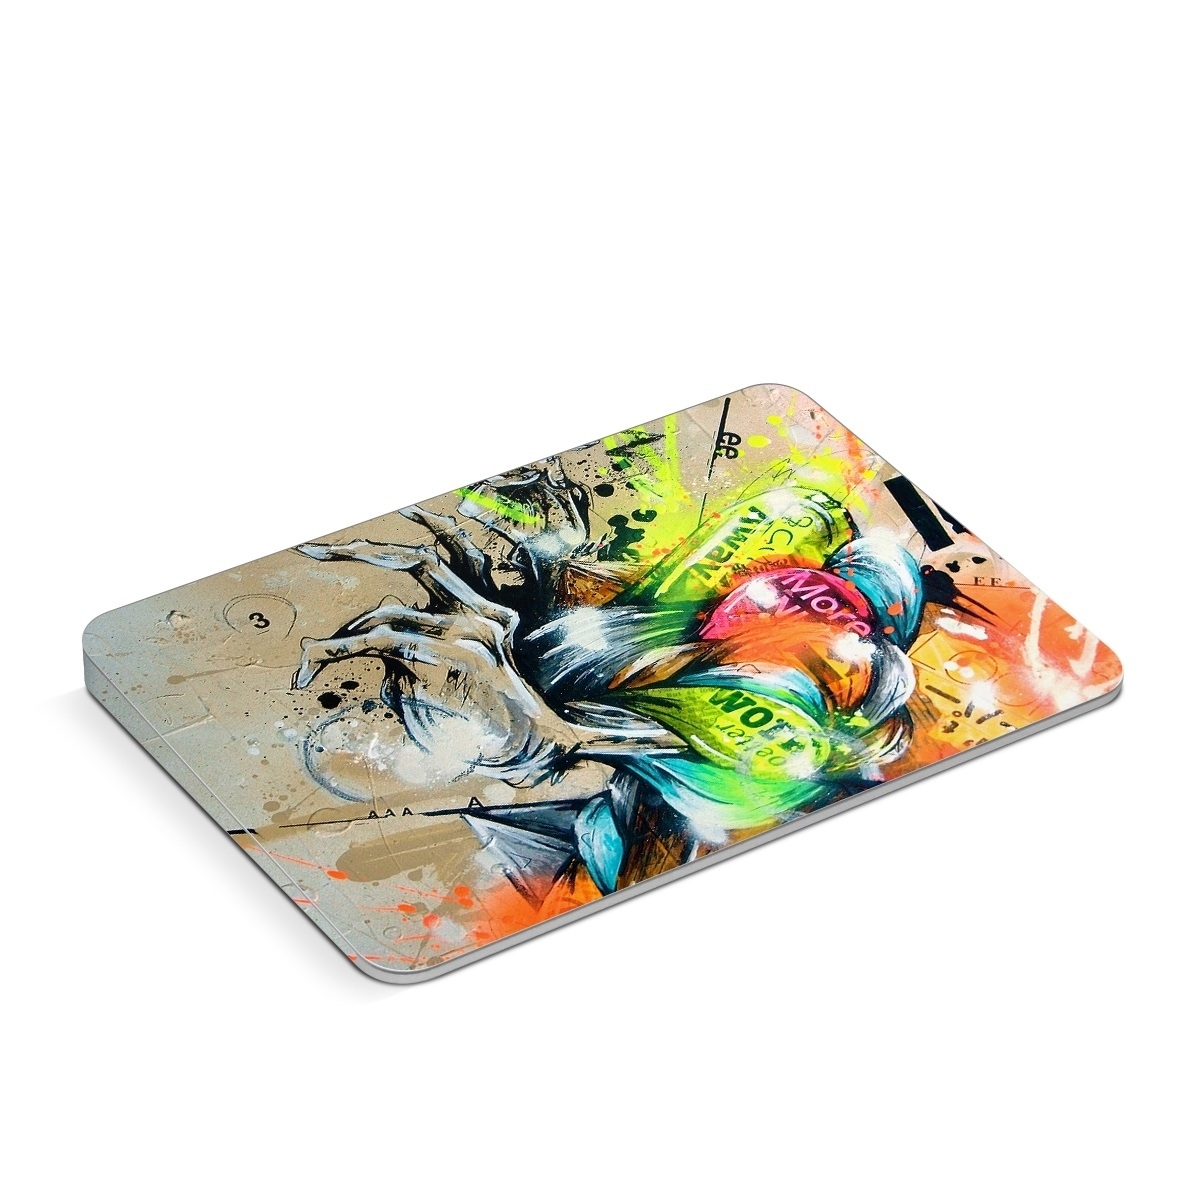 Apple Magic Trackpad Skin design of Graphic design, Art, Illustration, Fictional character, Visual arts, Graphics, Painting, Watercolor paint, Modern art, Games, with gray, black, green, red, orange, pink colors